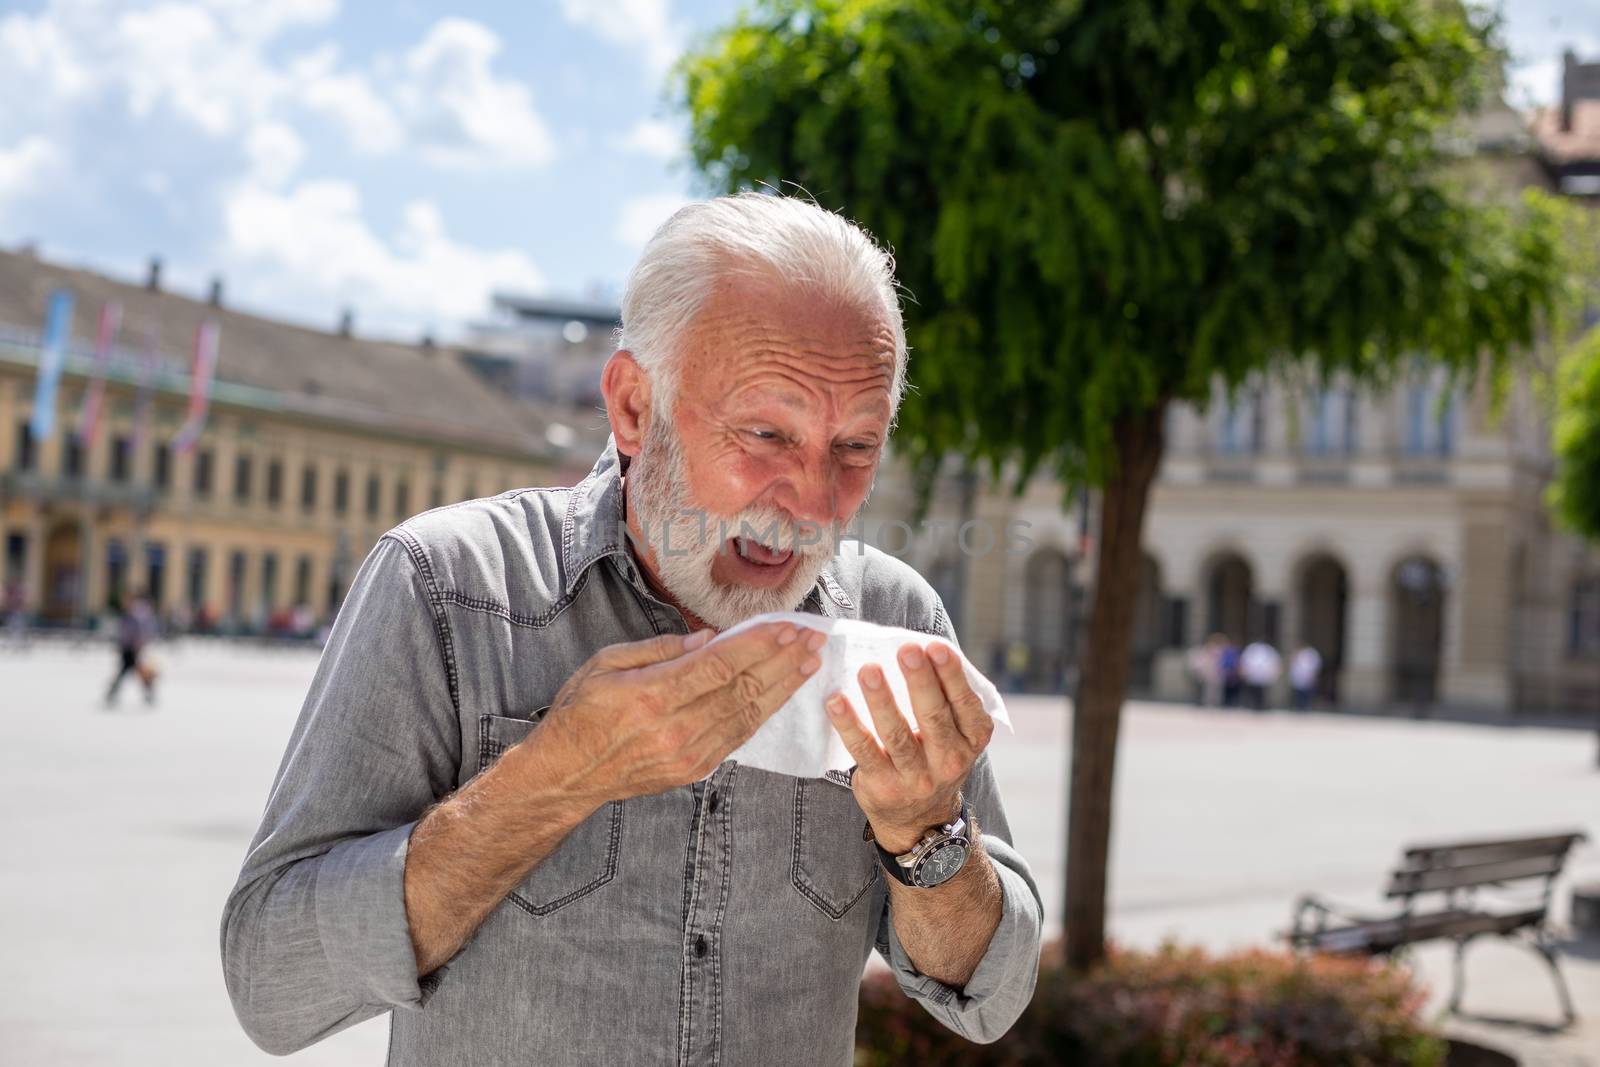 Old man coughs and sneezes into a handkerchief on street, outdoor, hot summer, allergies and illness concept